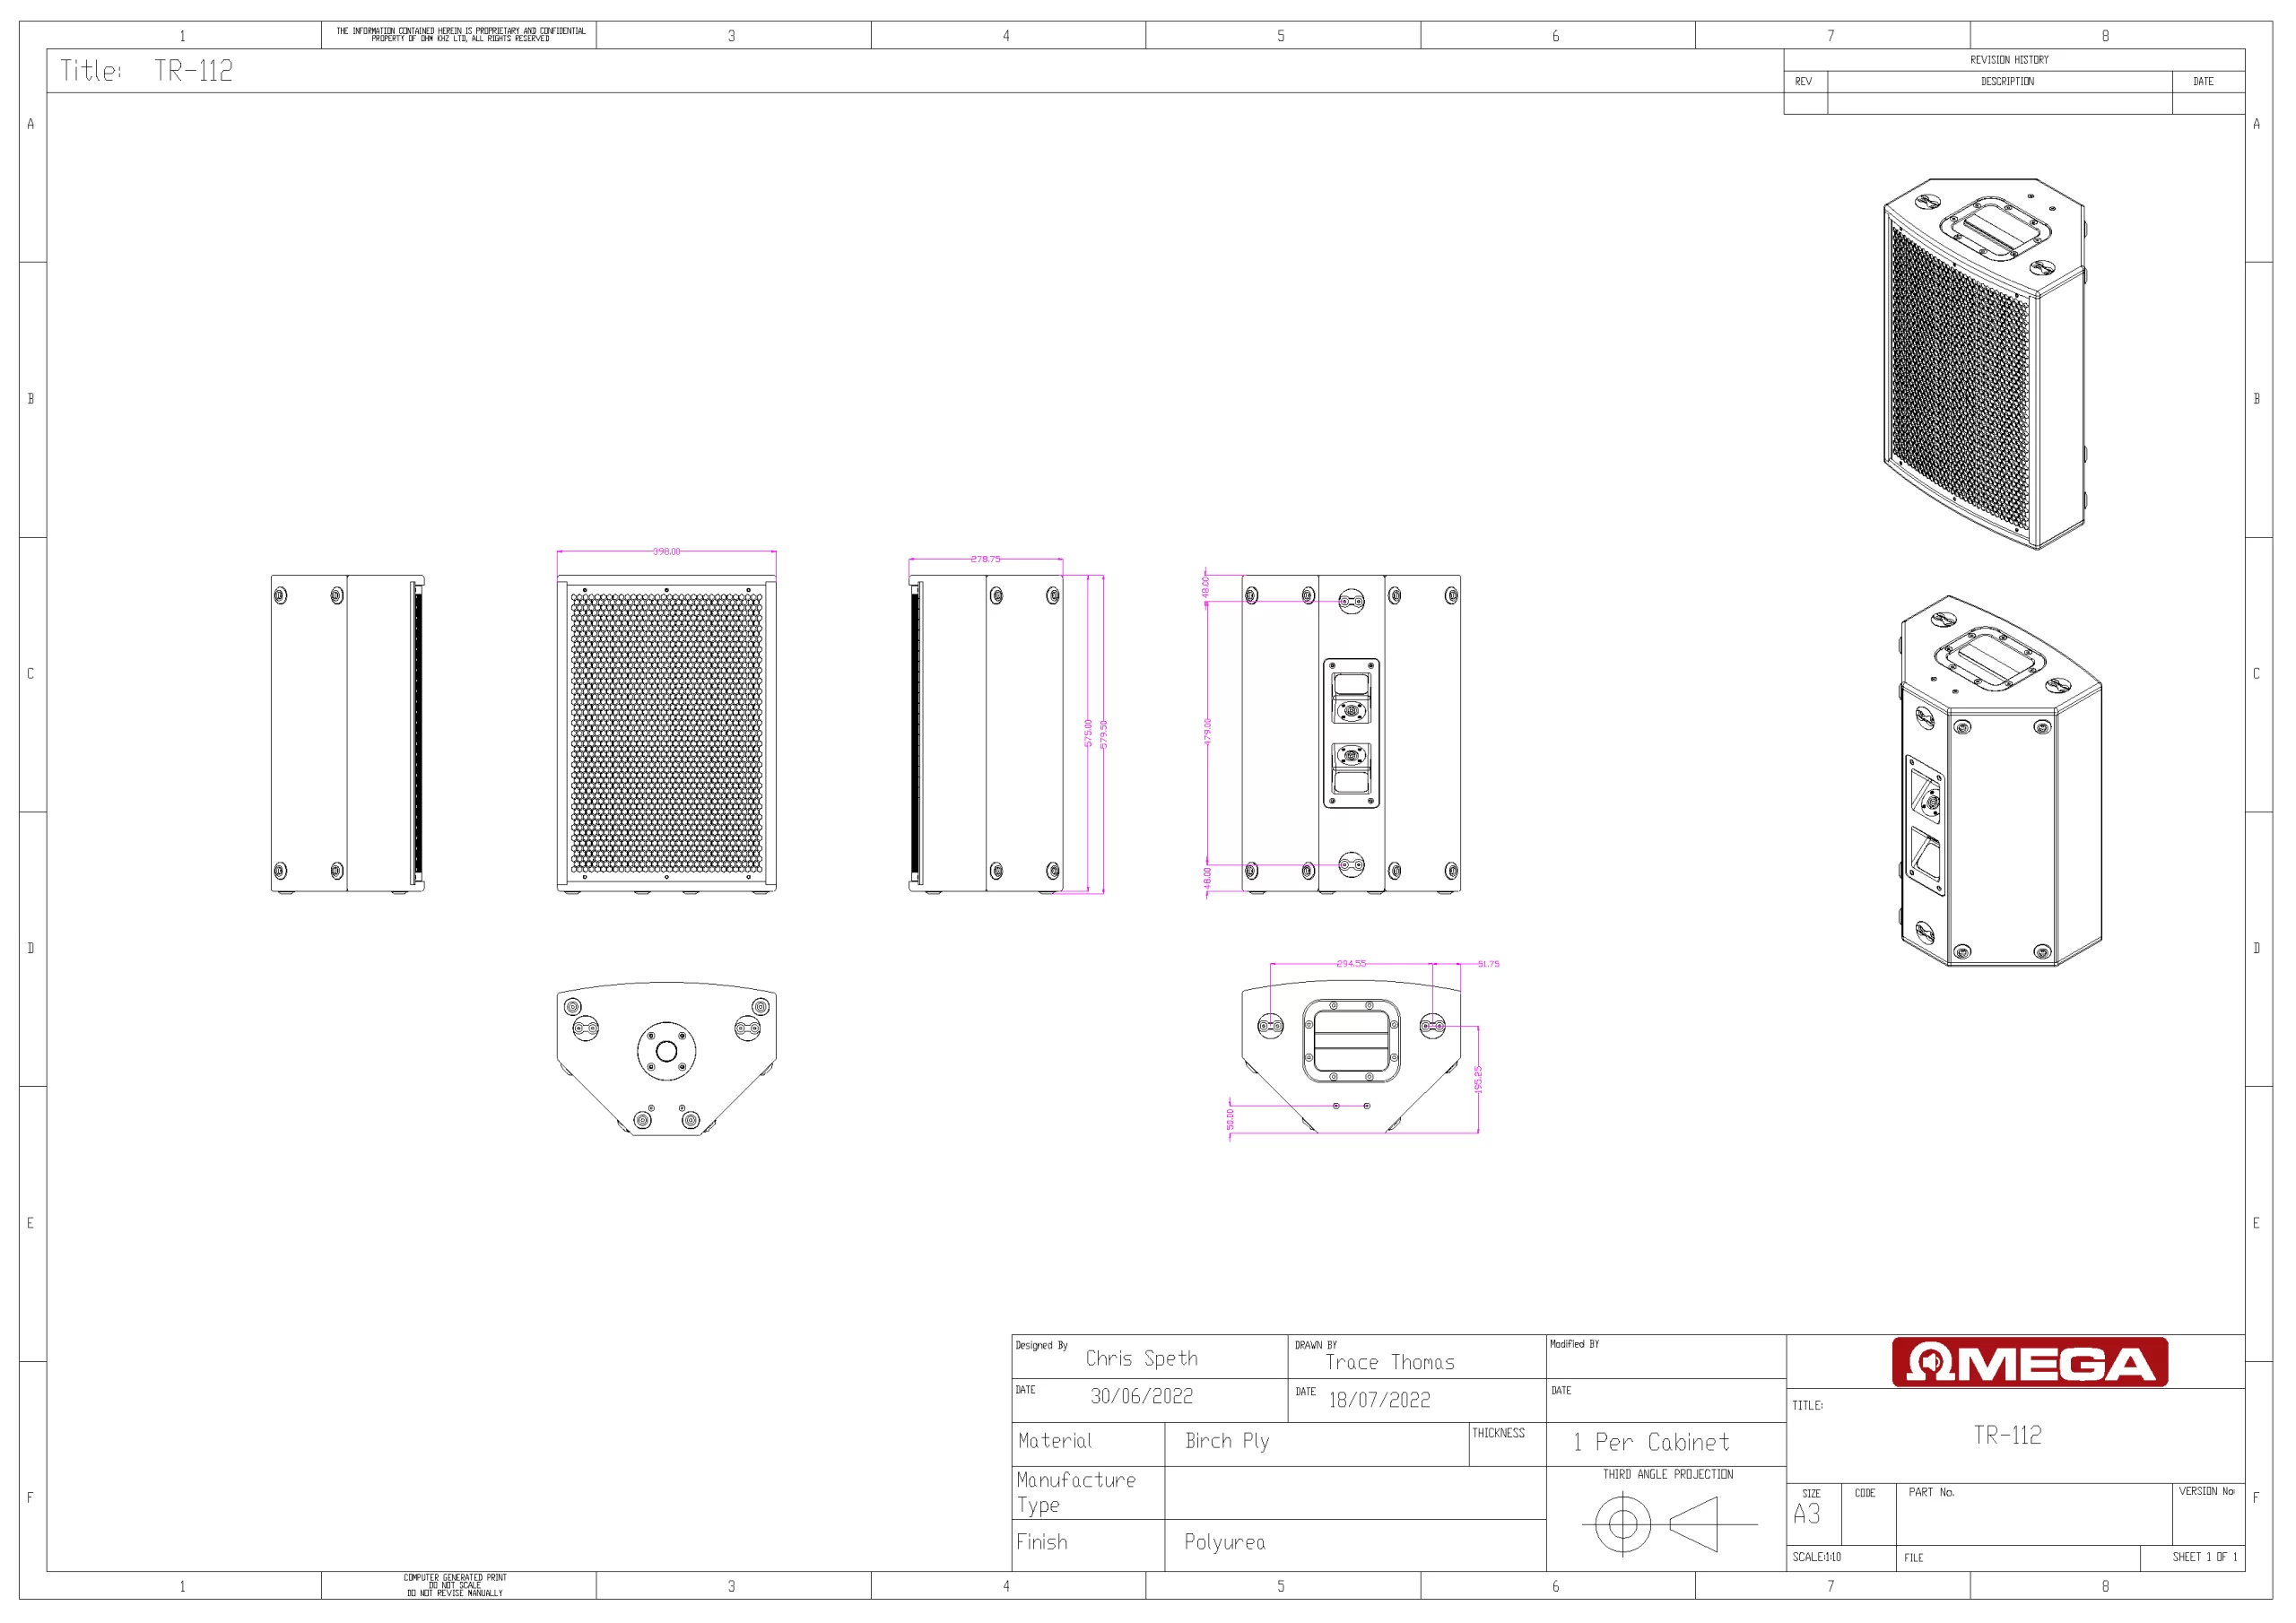 Omega TR-112 Cabinet drawing